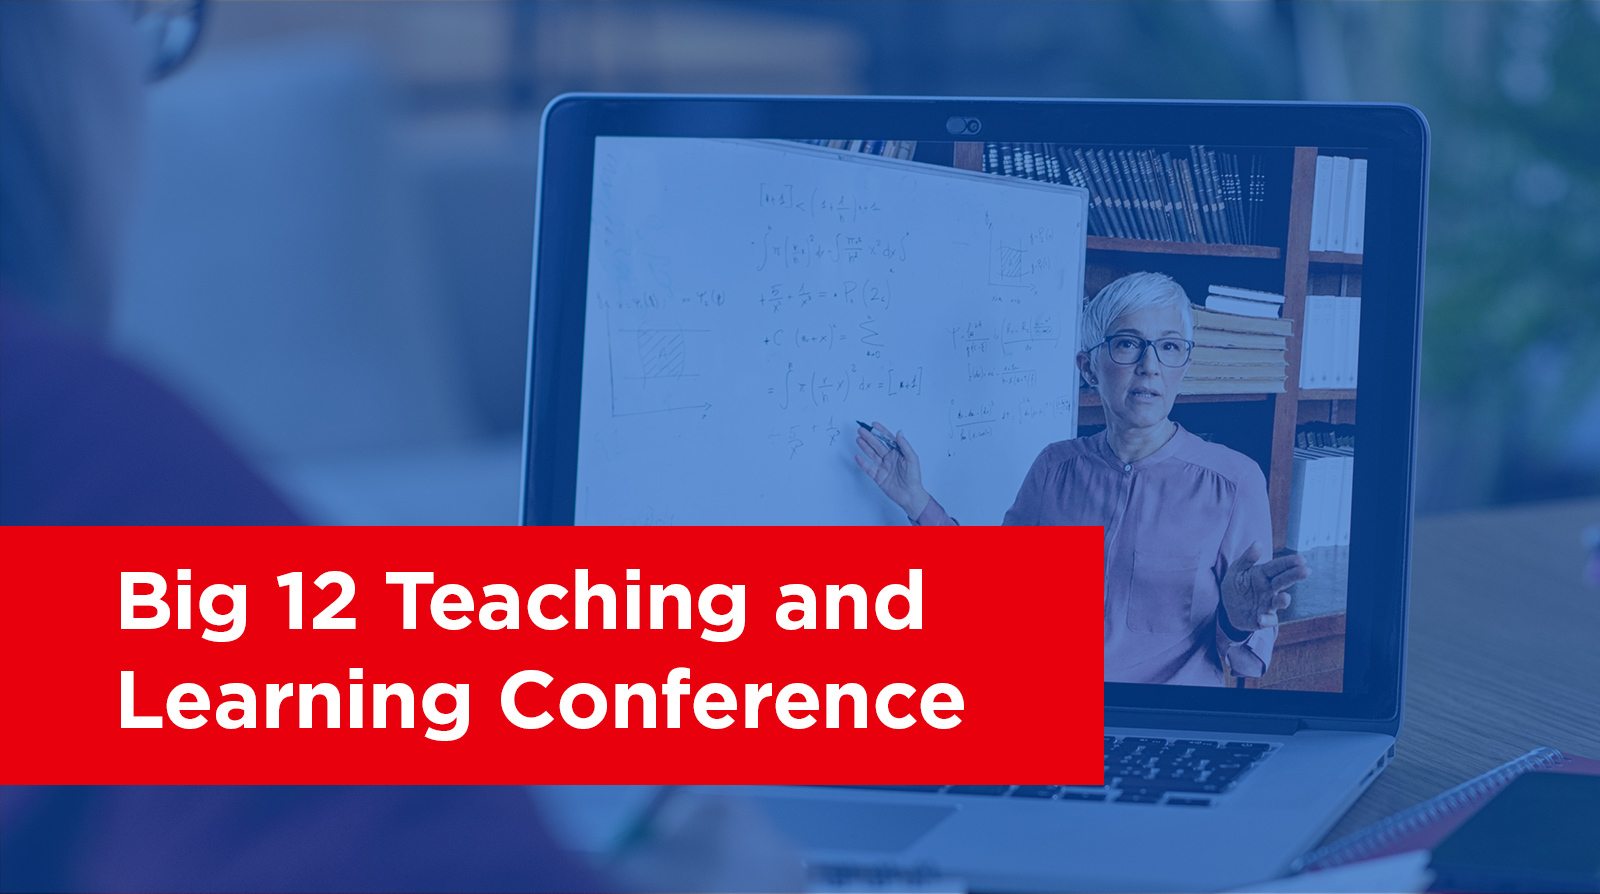 Big 12 Teaching and Learning Conference 